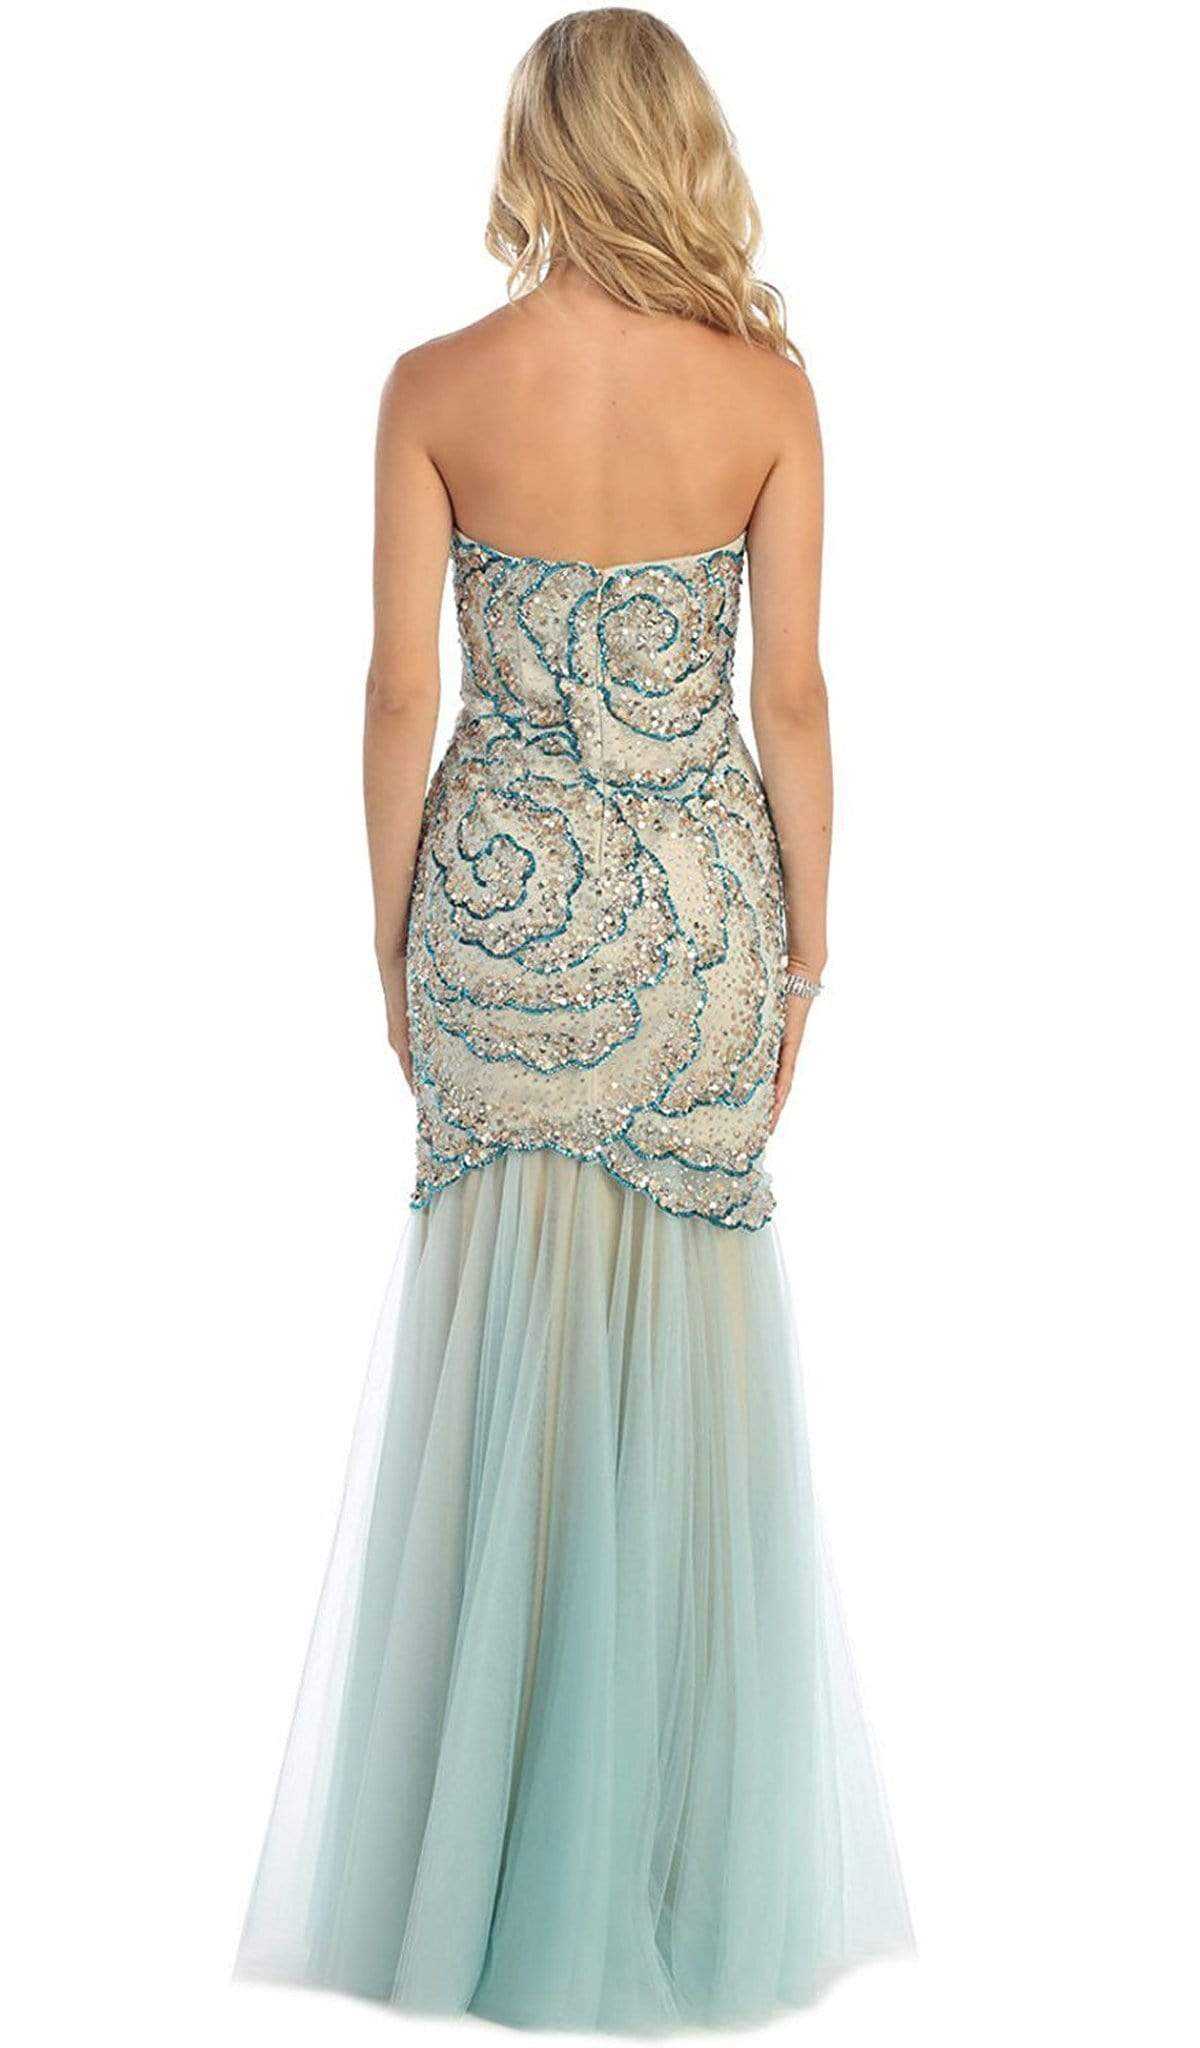 May Queen, May Queen - Sequined Rosette Motif Evening Gown RQ7289 - 2 pcs Aqua/Nude in Size 8 and 14 Available